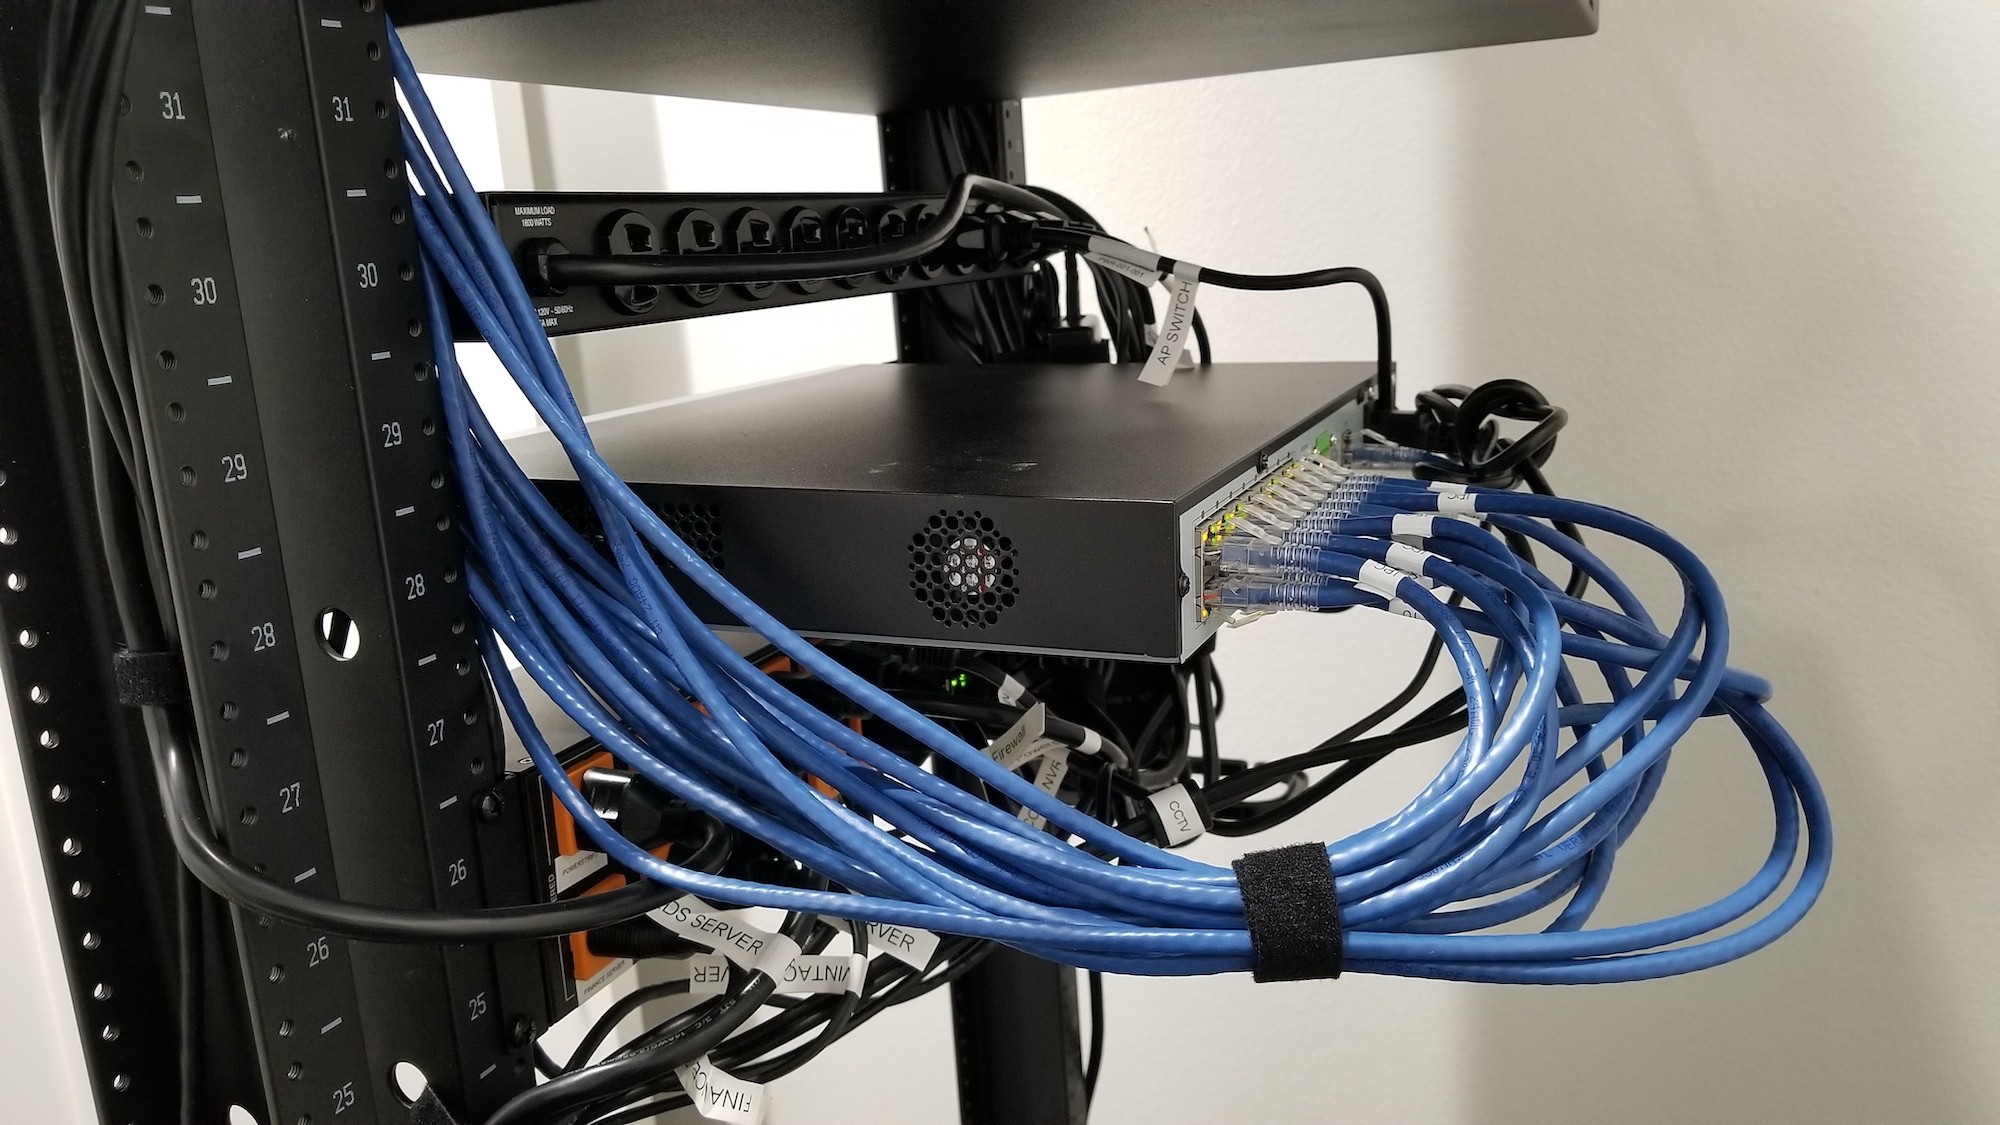 What Kind of Ethernet Cable Do I Need?